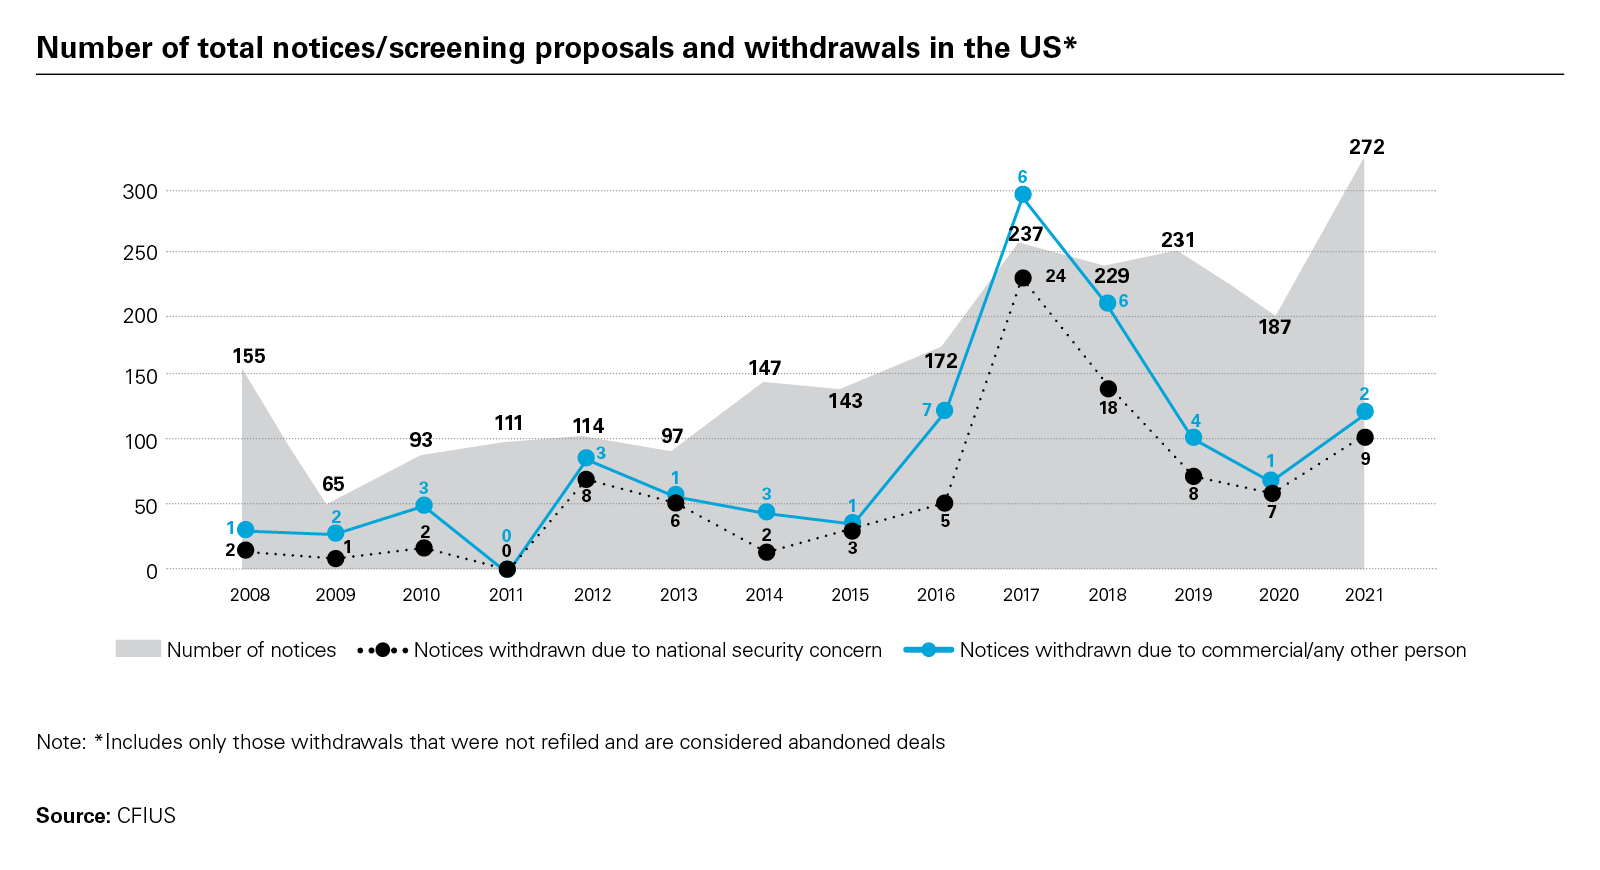 Number of total notices/screening proposals and withdrawals in the US